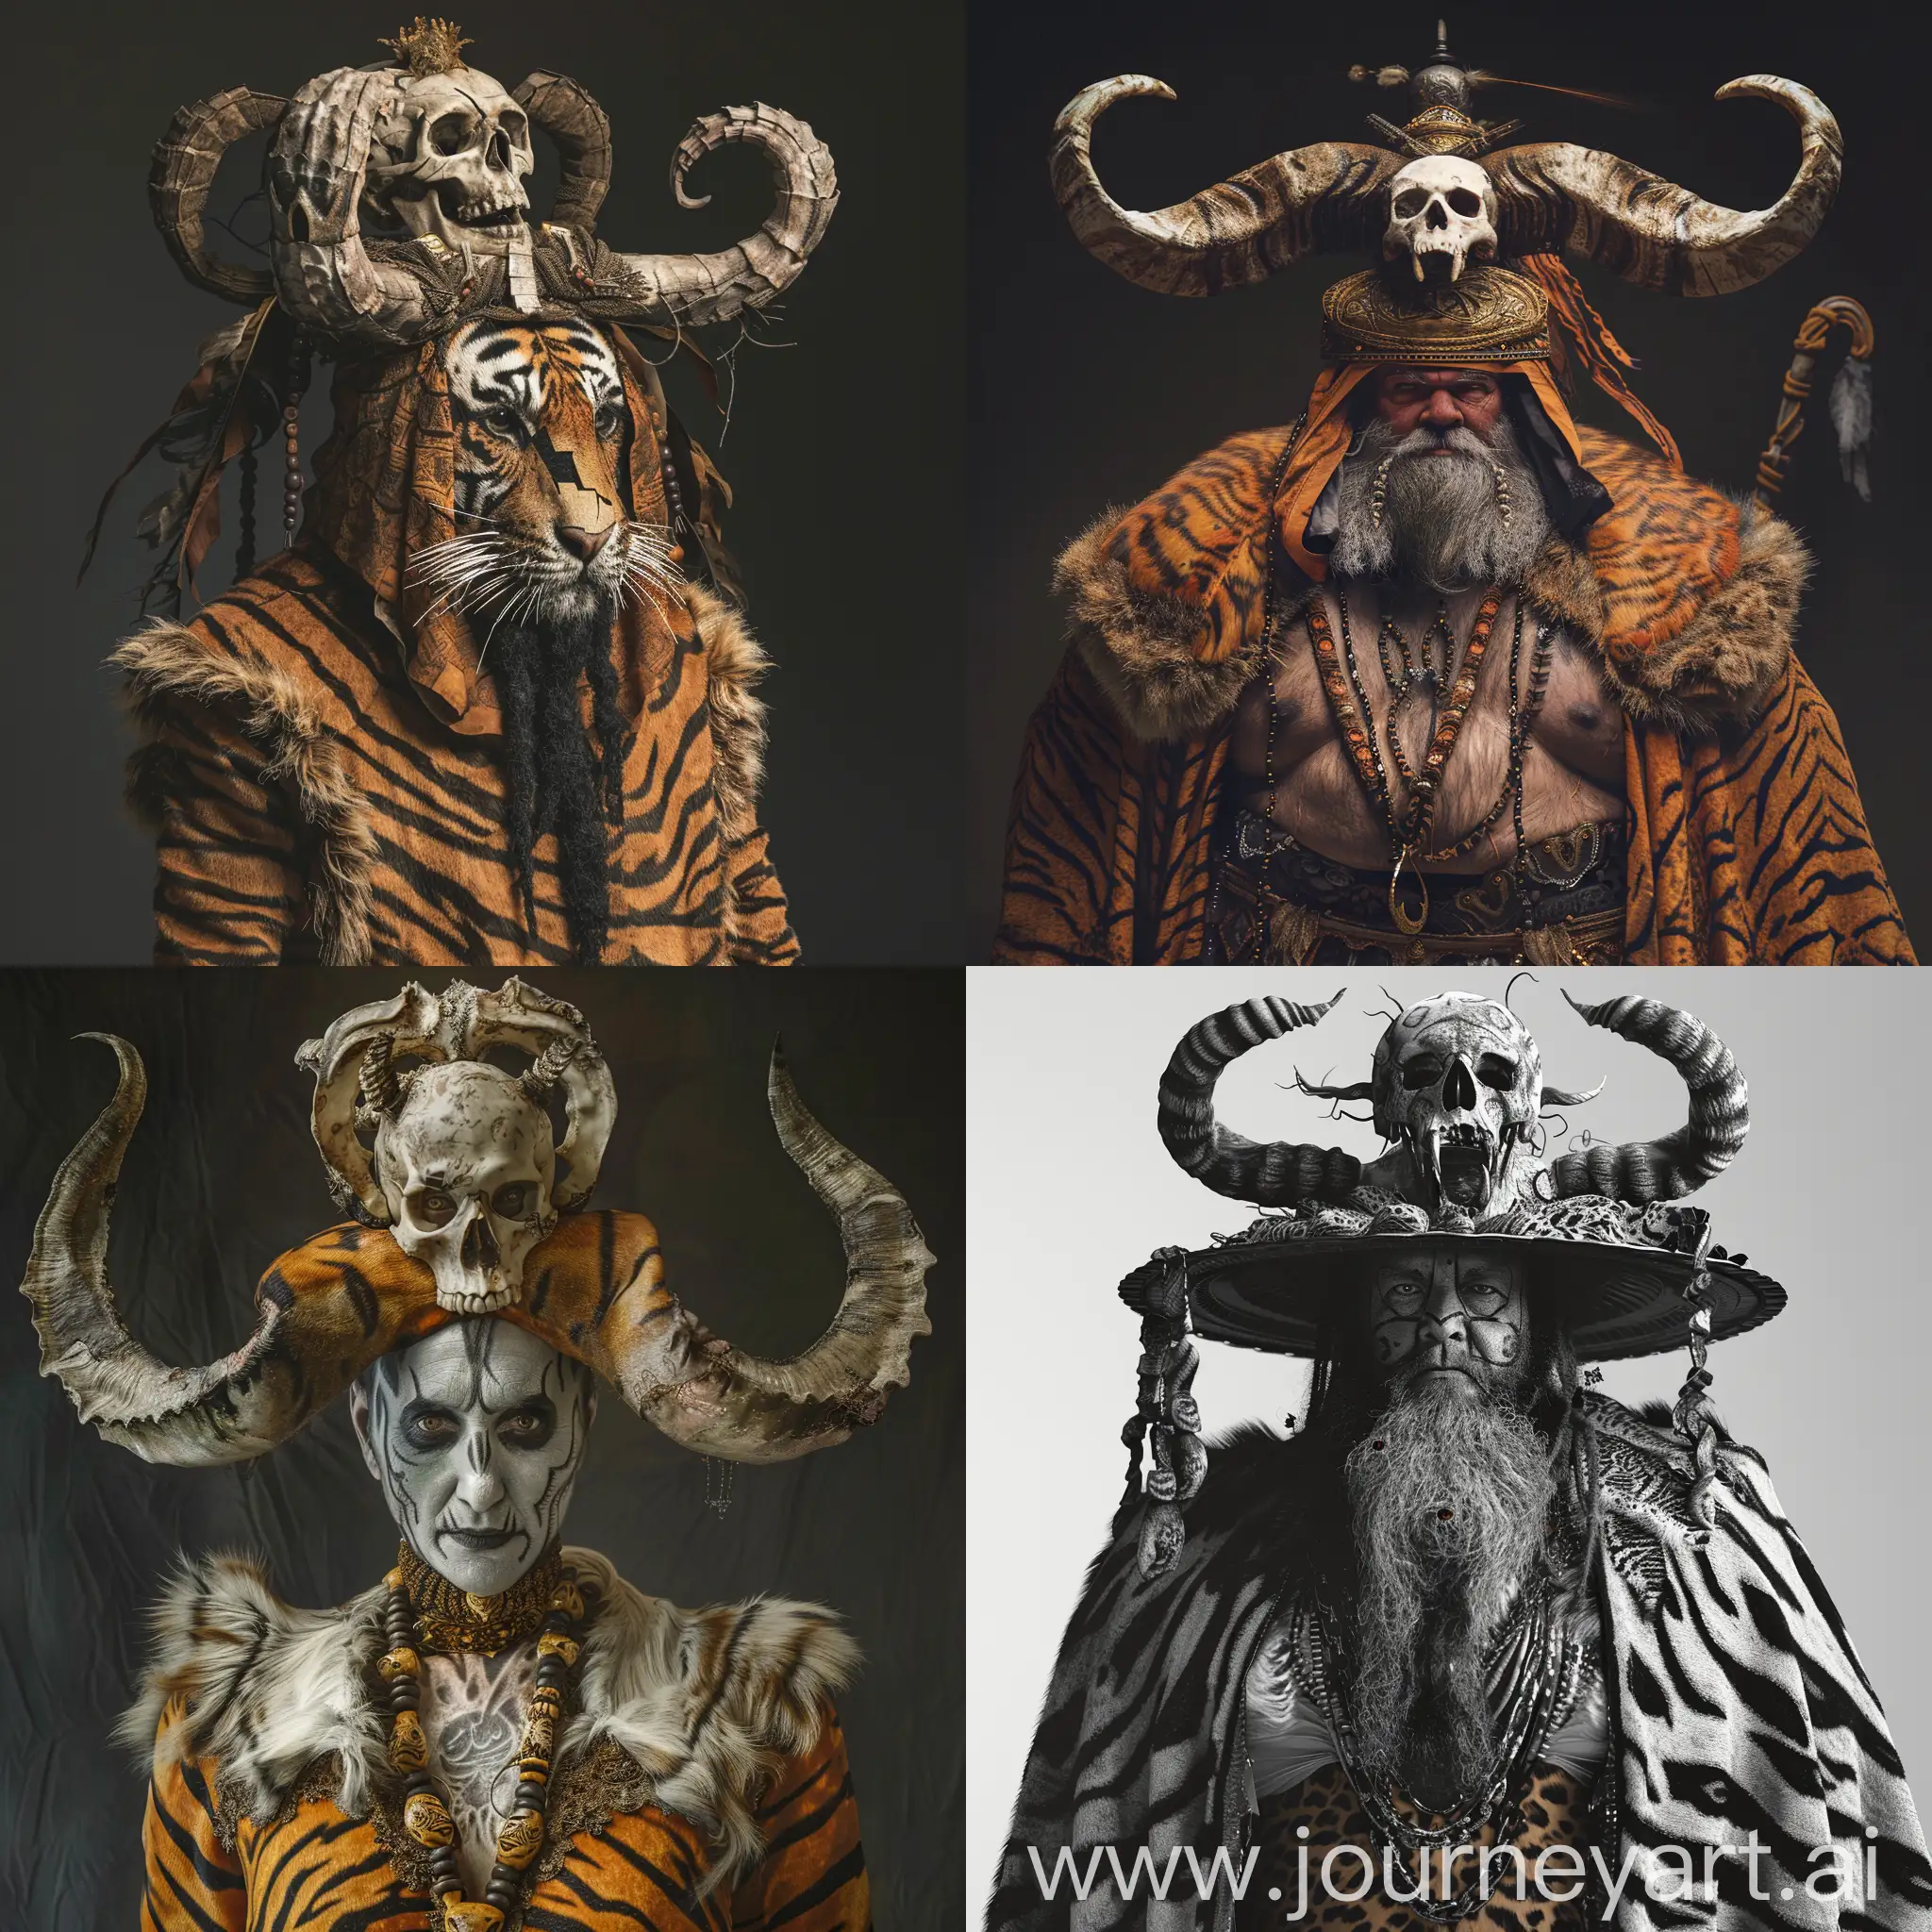 Based on the data available on the Persian web, reconstruct for me the face of Rostam Dostan, the legendary warrior of the Shahnameh. To help you, I will tell you some of his characteristics: a large figure with a tiger skin dress and a hat made of the skull of a horned demon.